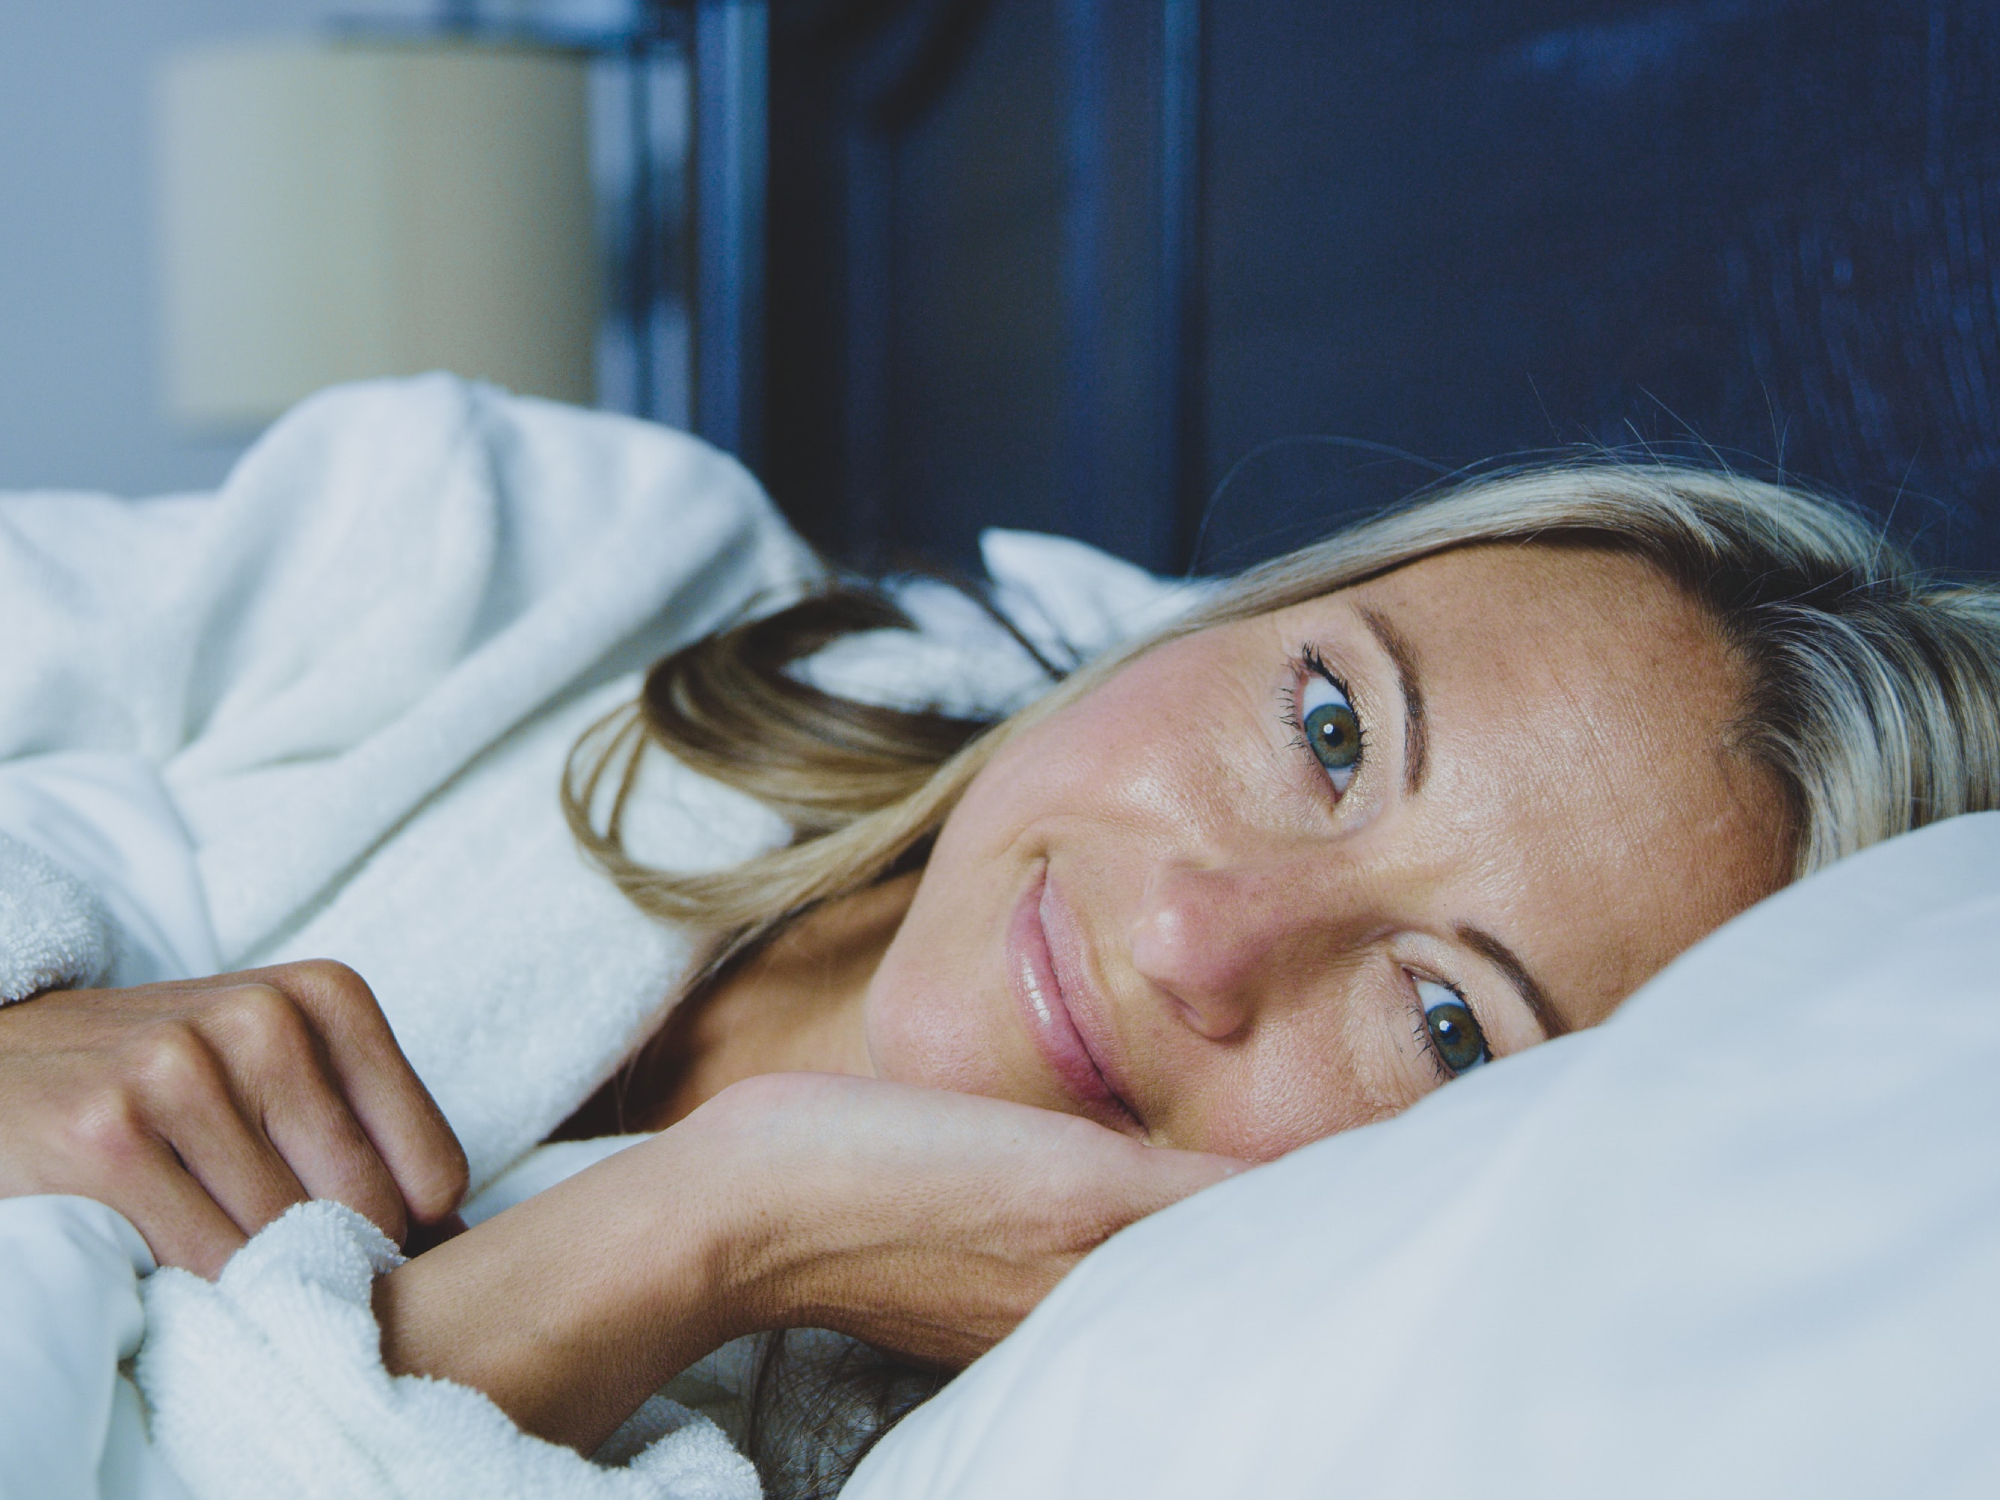 A blonde woman in a white bathrobe smiling and lying on a white bed in a blue room.